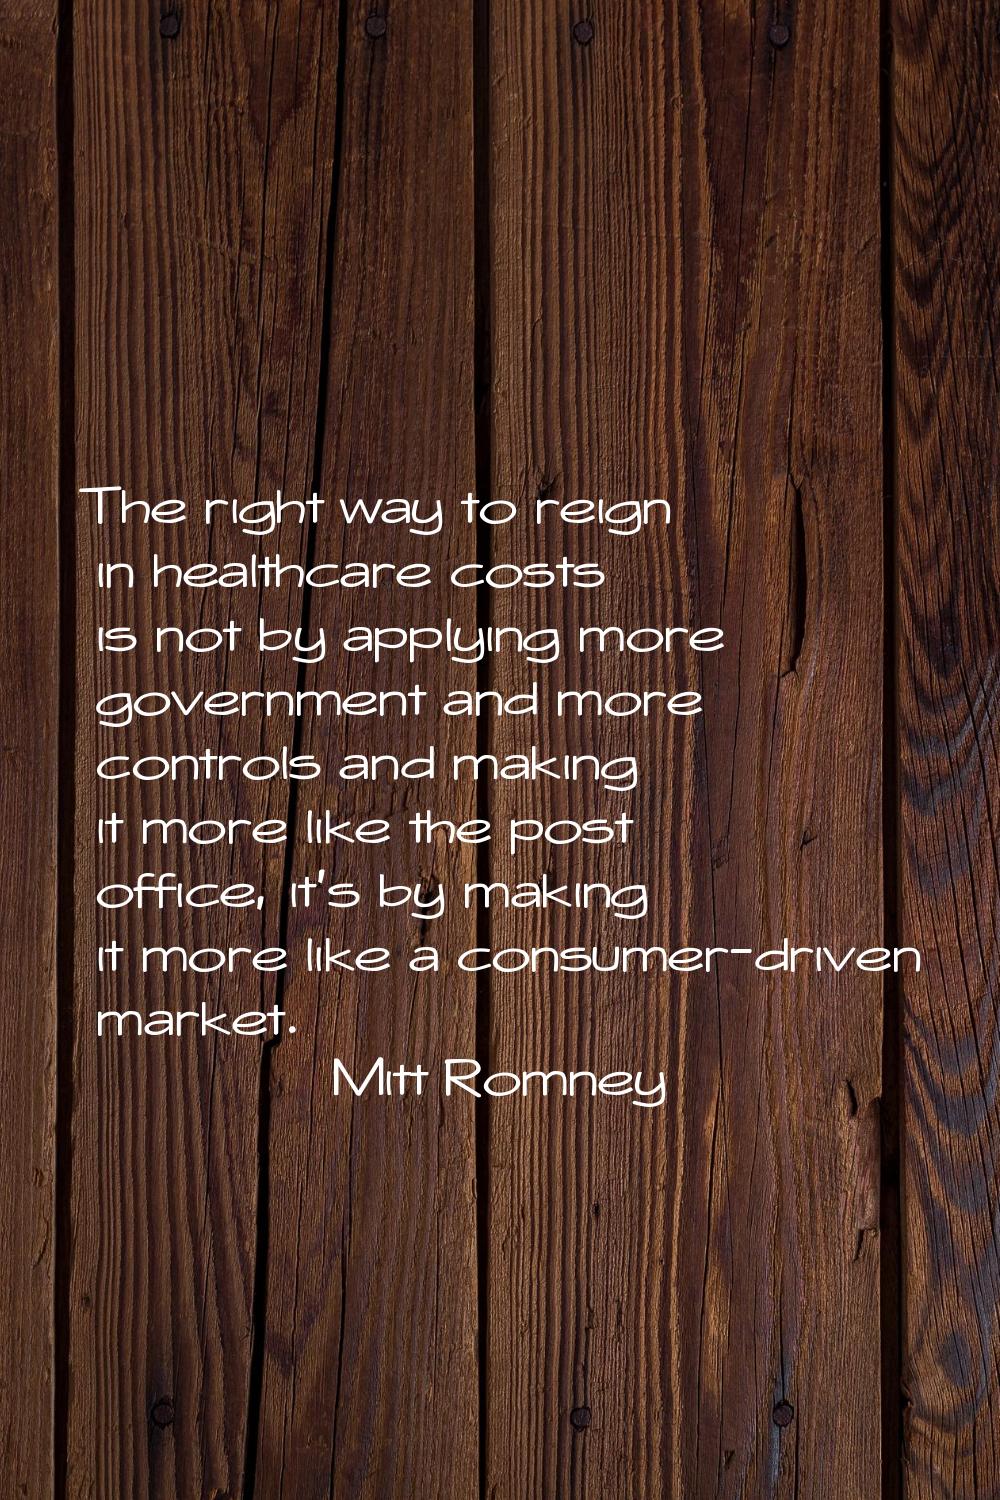 The right way to reign in healthcare costs is not by applying more government and more controls and